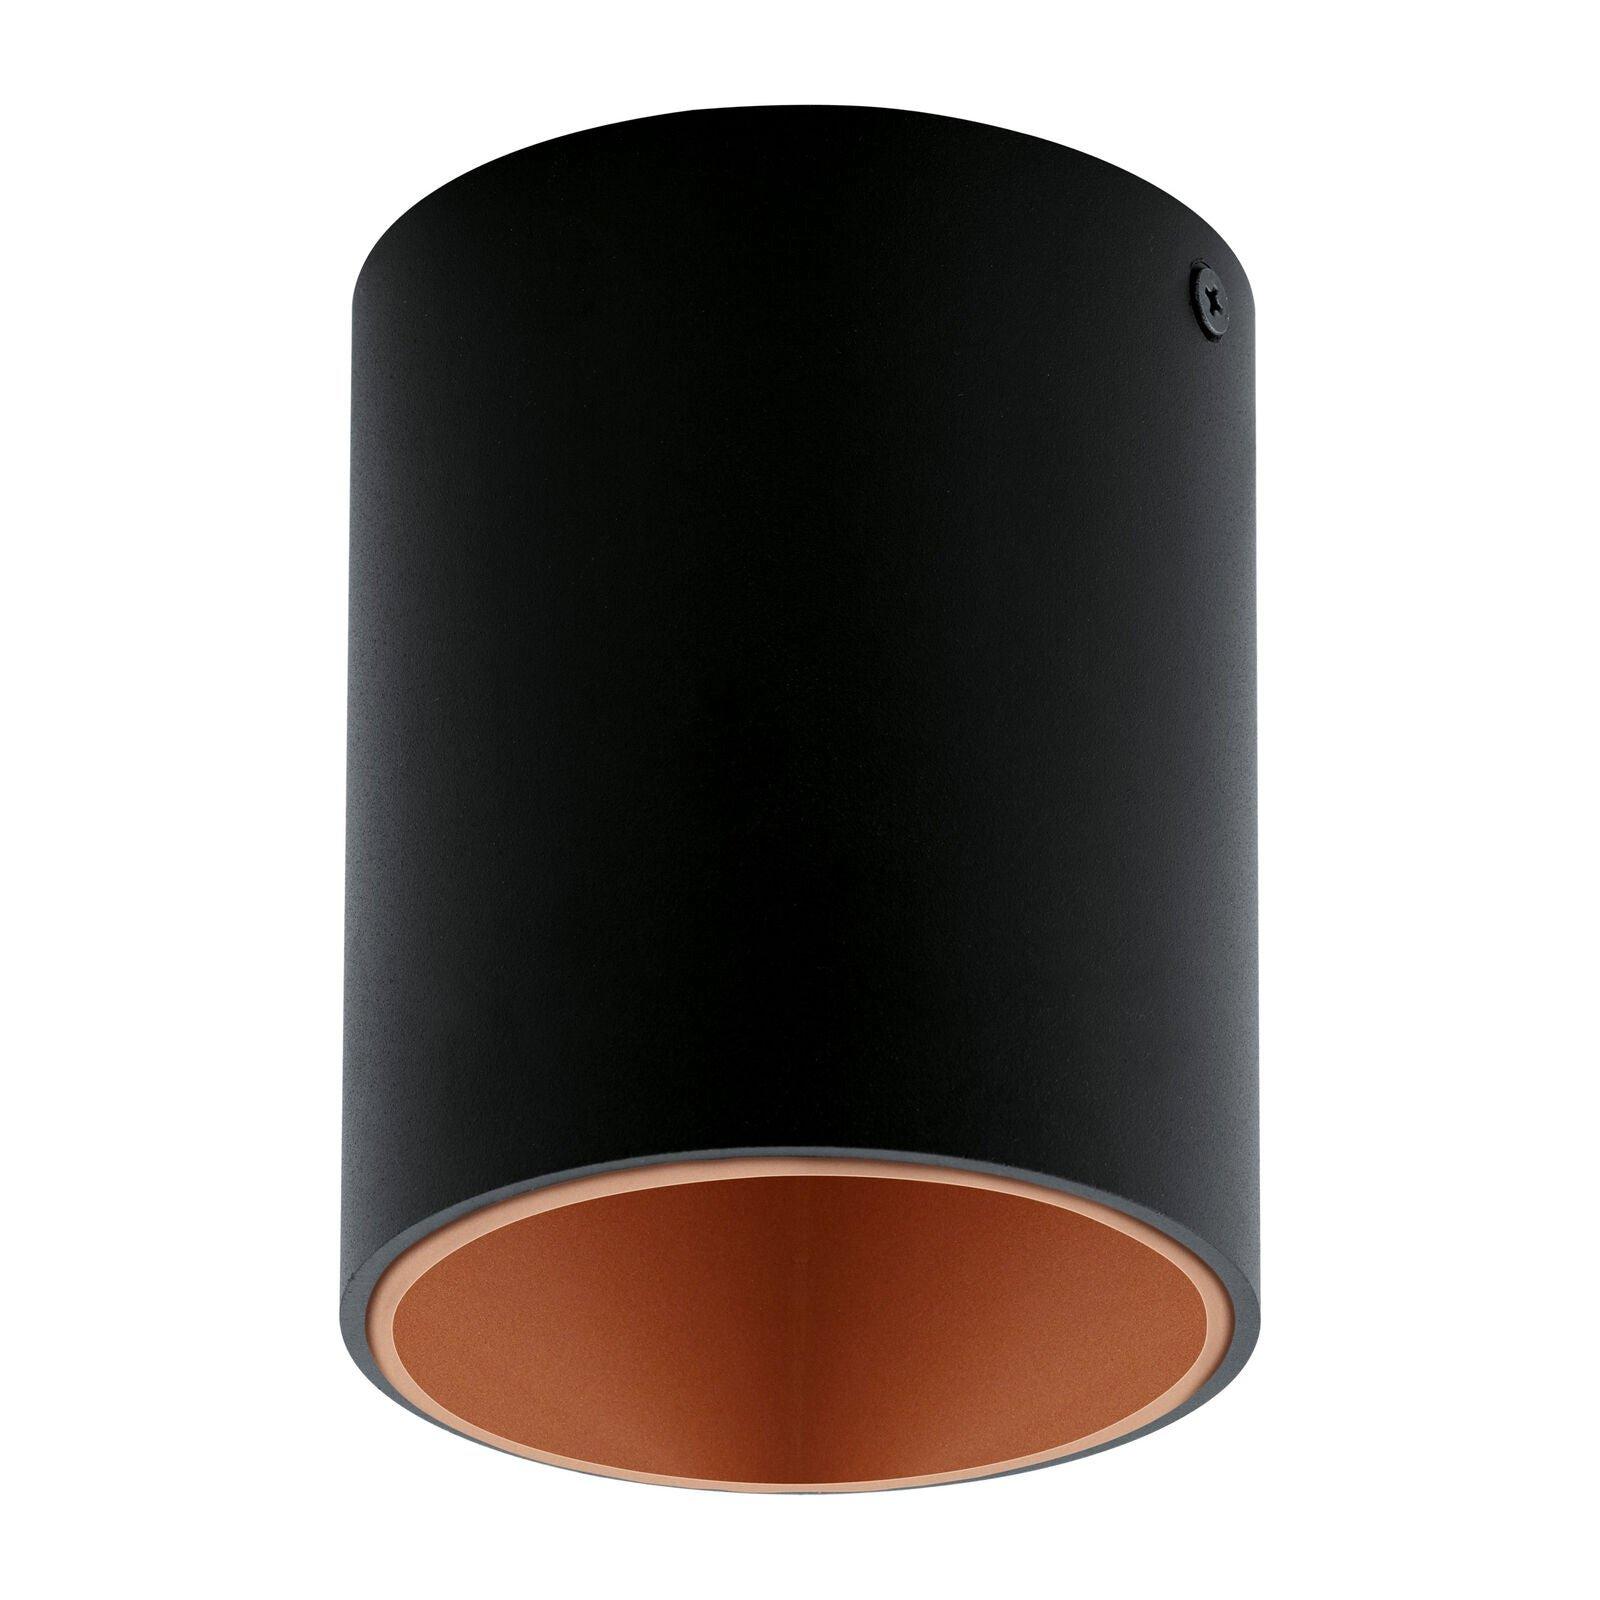 Wall / Ceiling Light Black & Copper Round Downlight 3.3W Built in LED